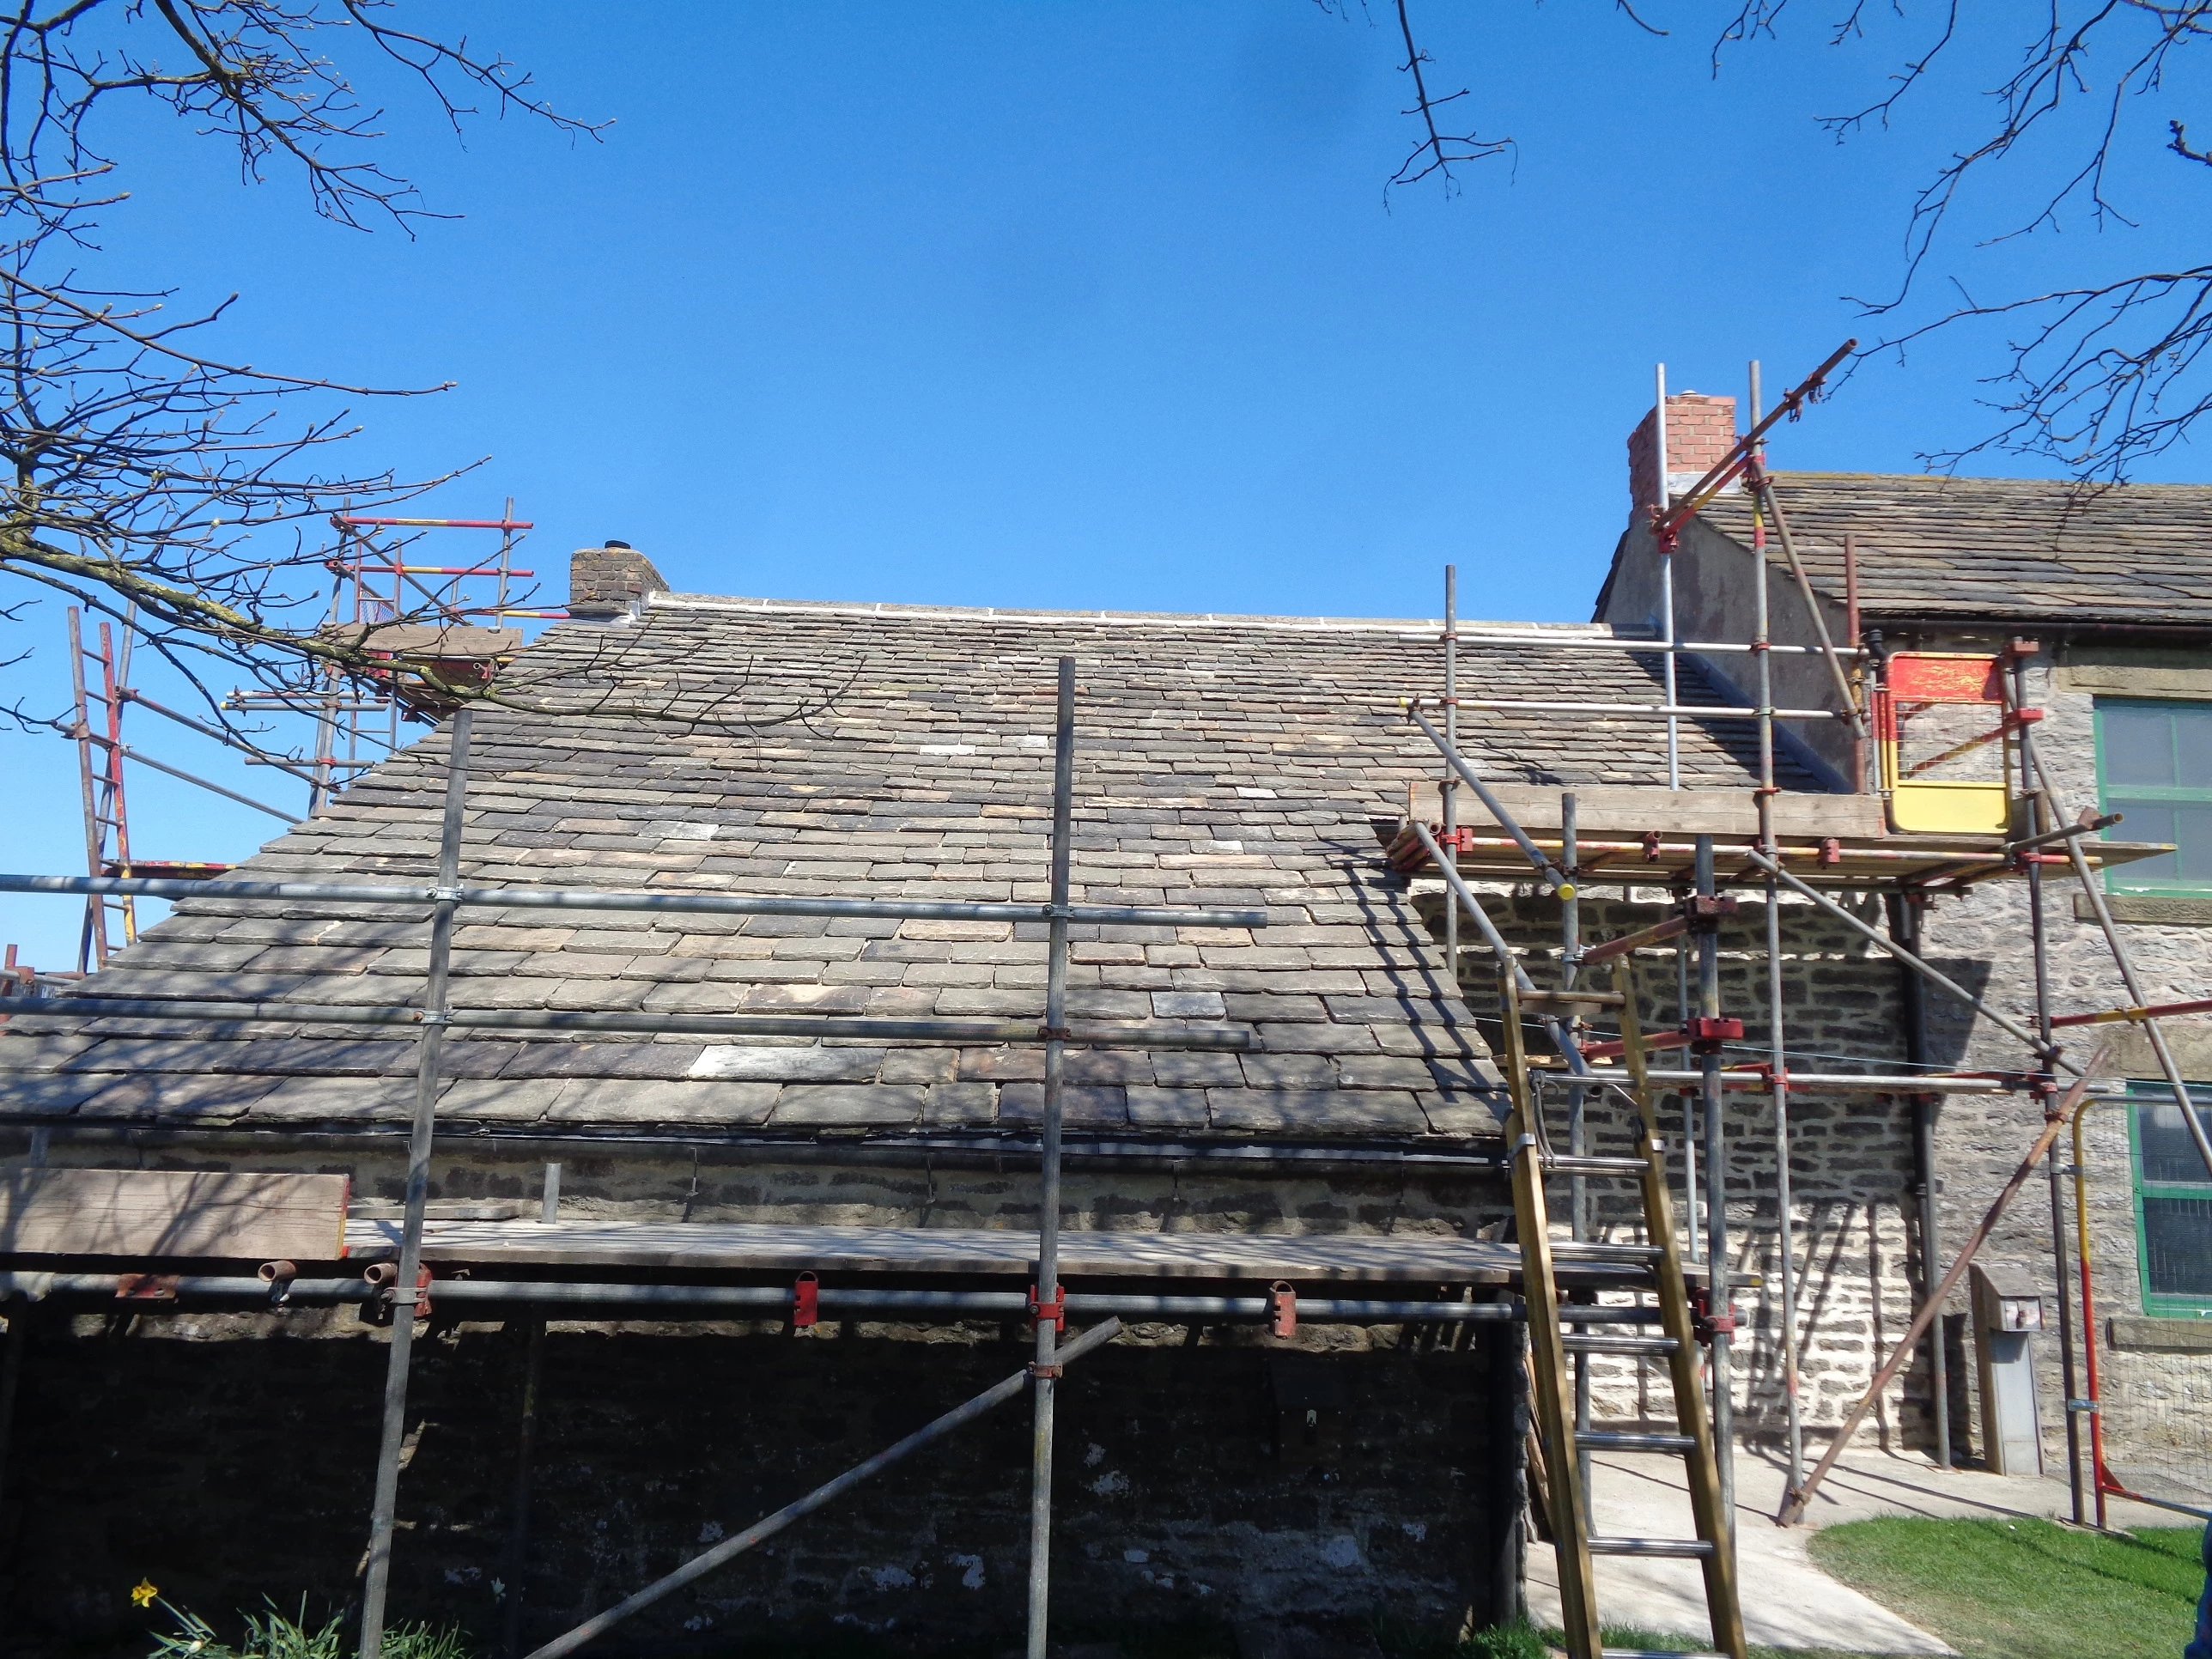 The new roof at Magpie Mine, Derbyshire, installed by Martin-Brooks.